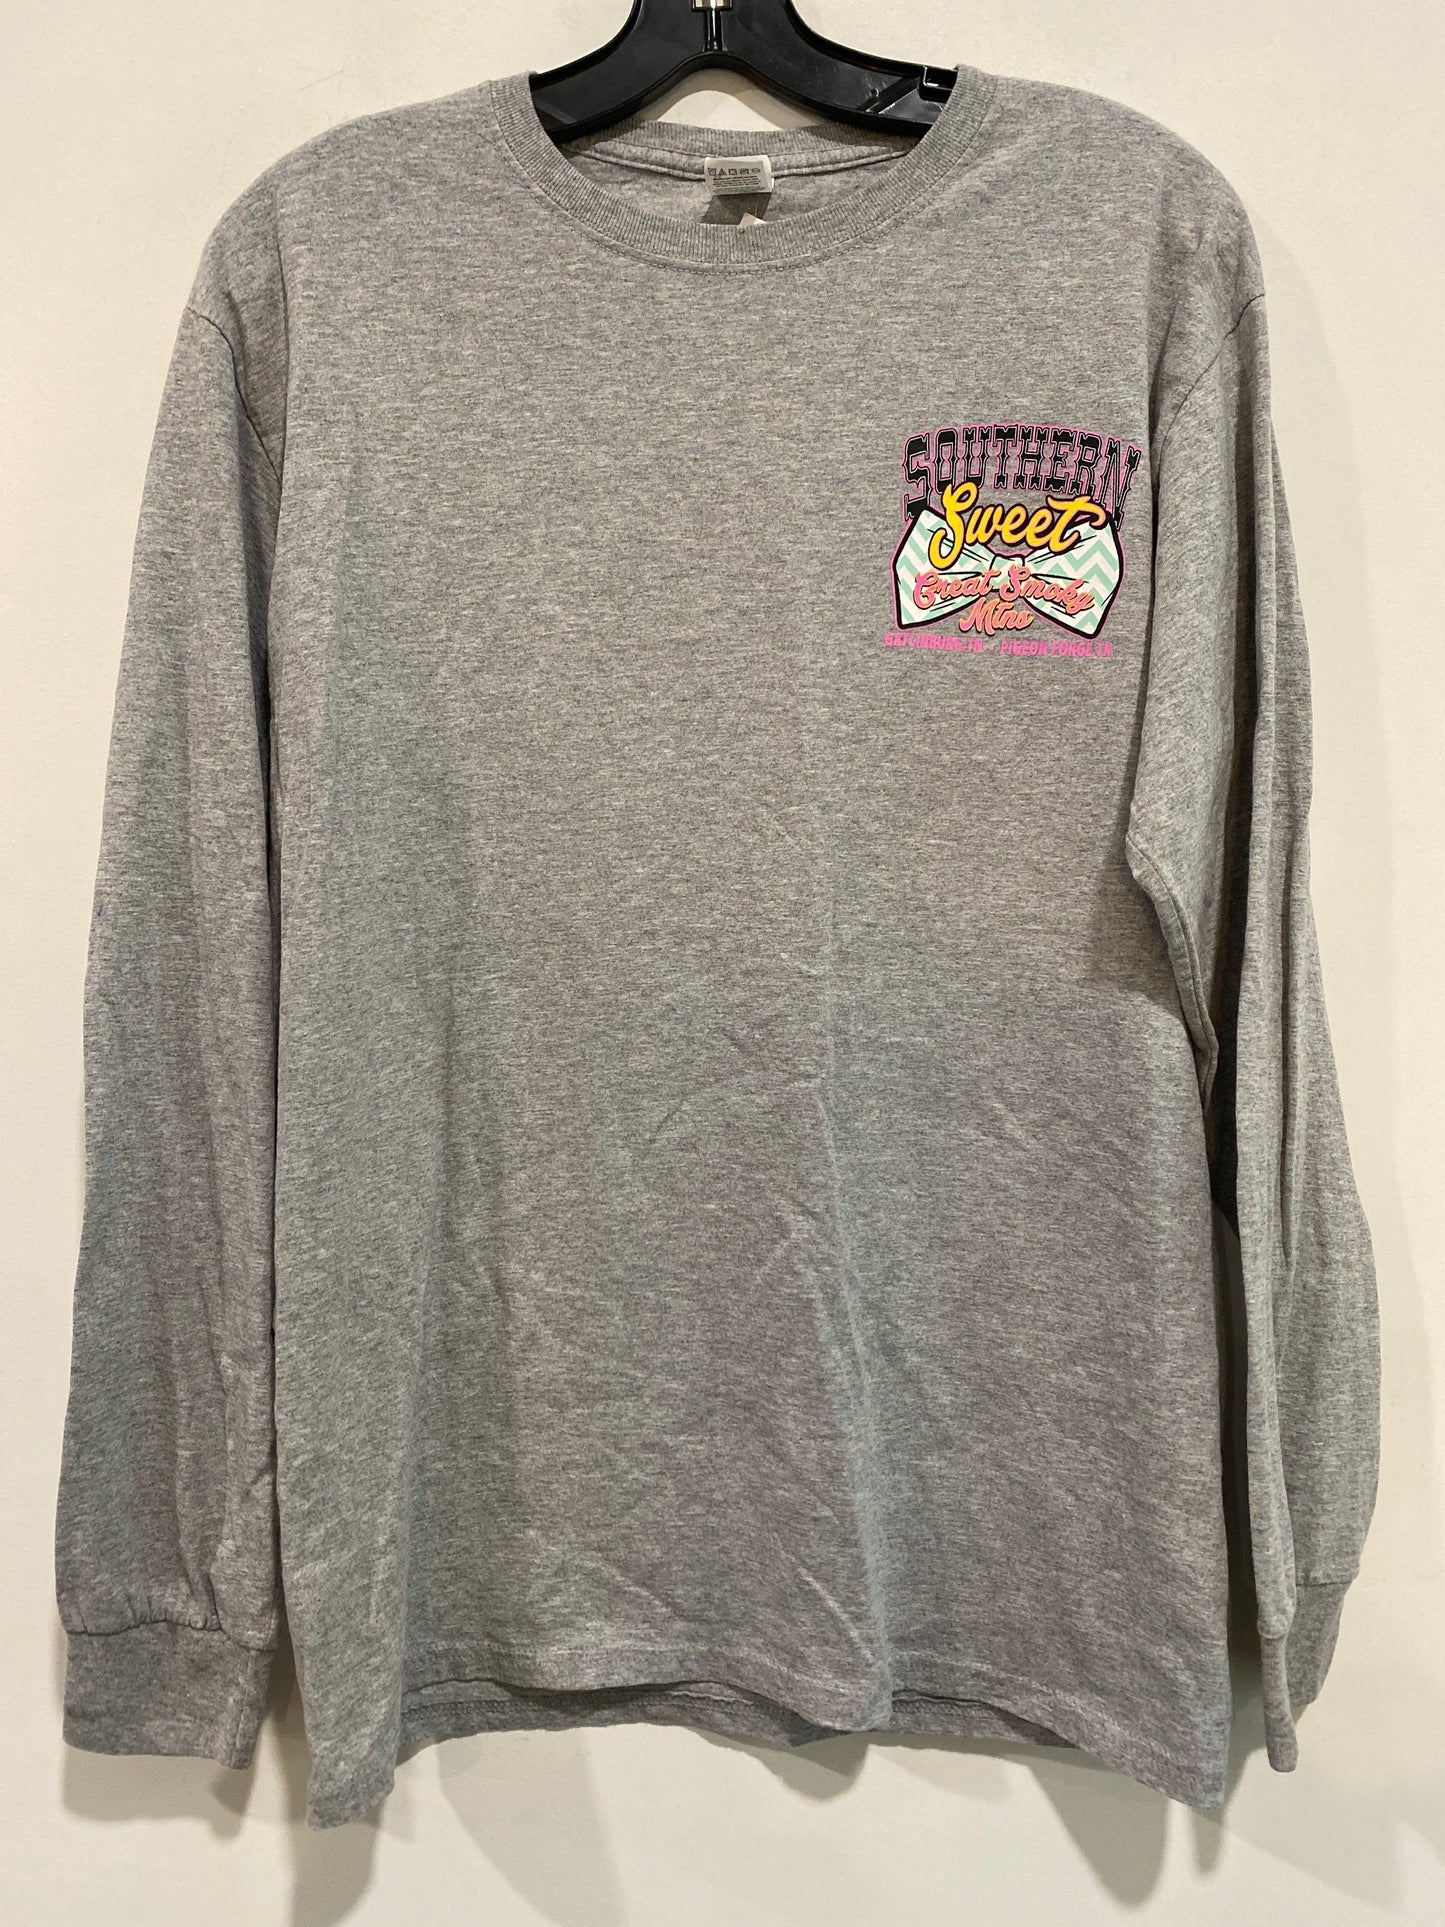 Grey Top Long Sleeve Fruit Of The Loom, Size M